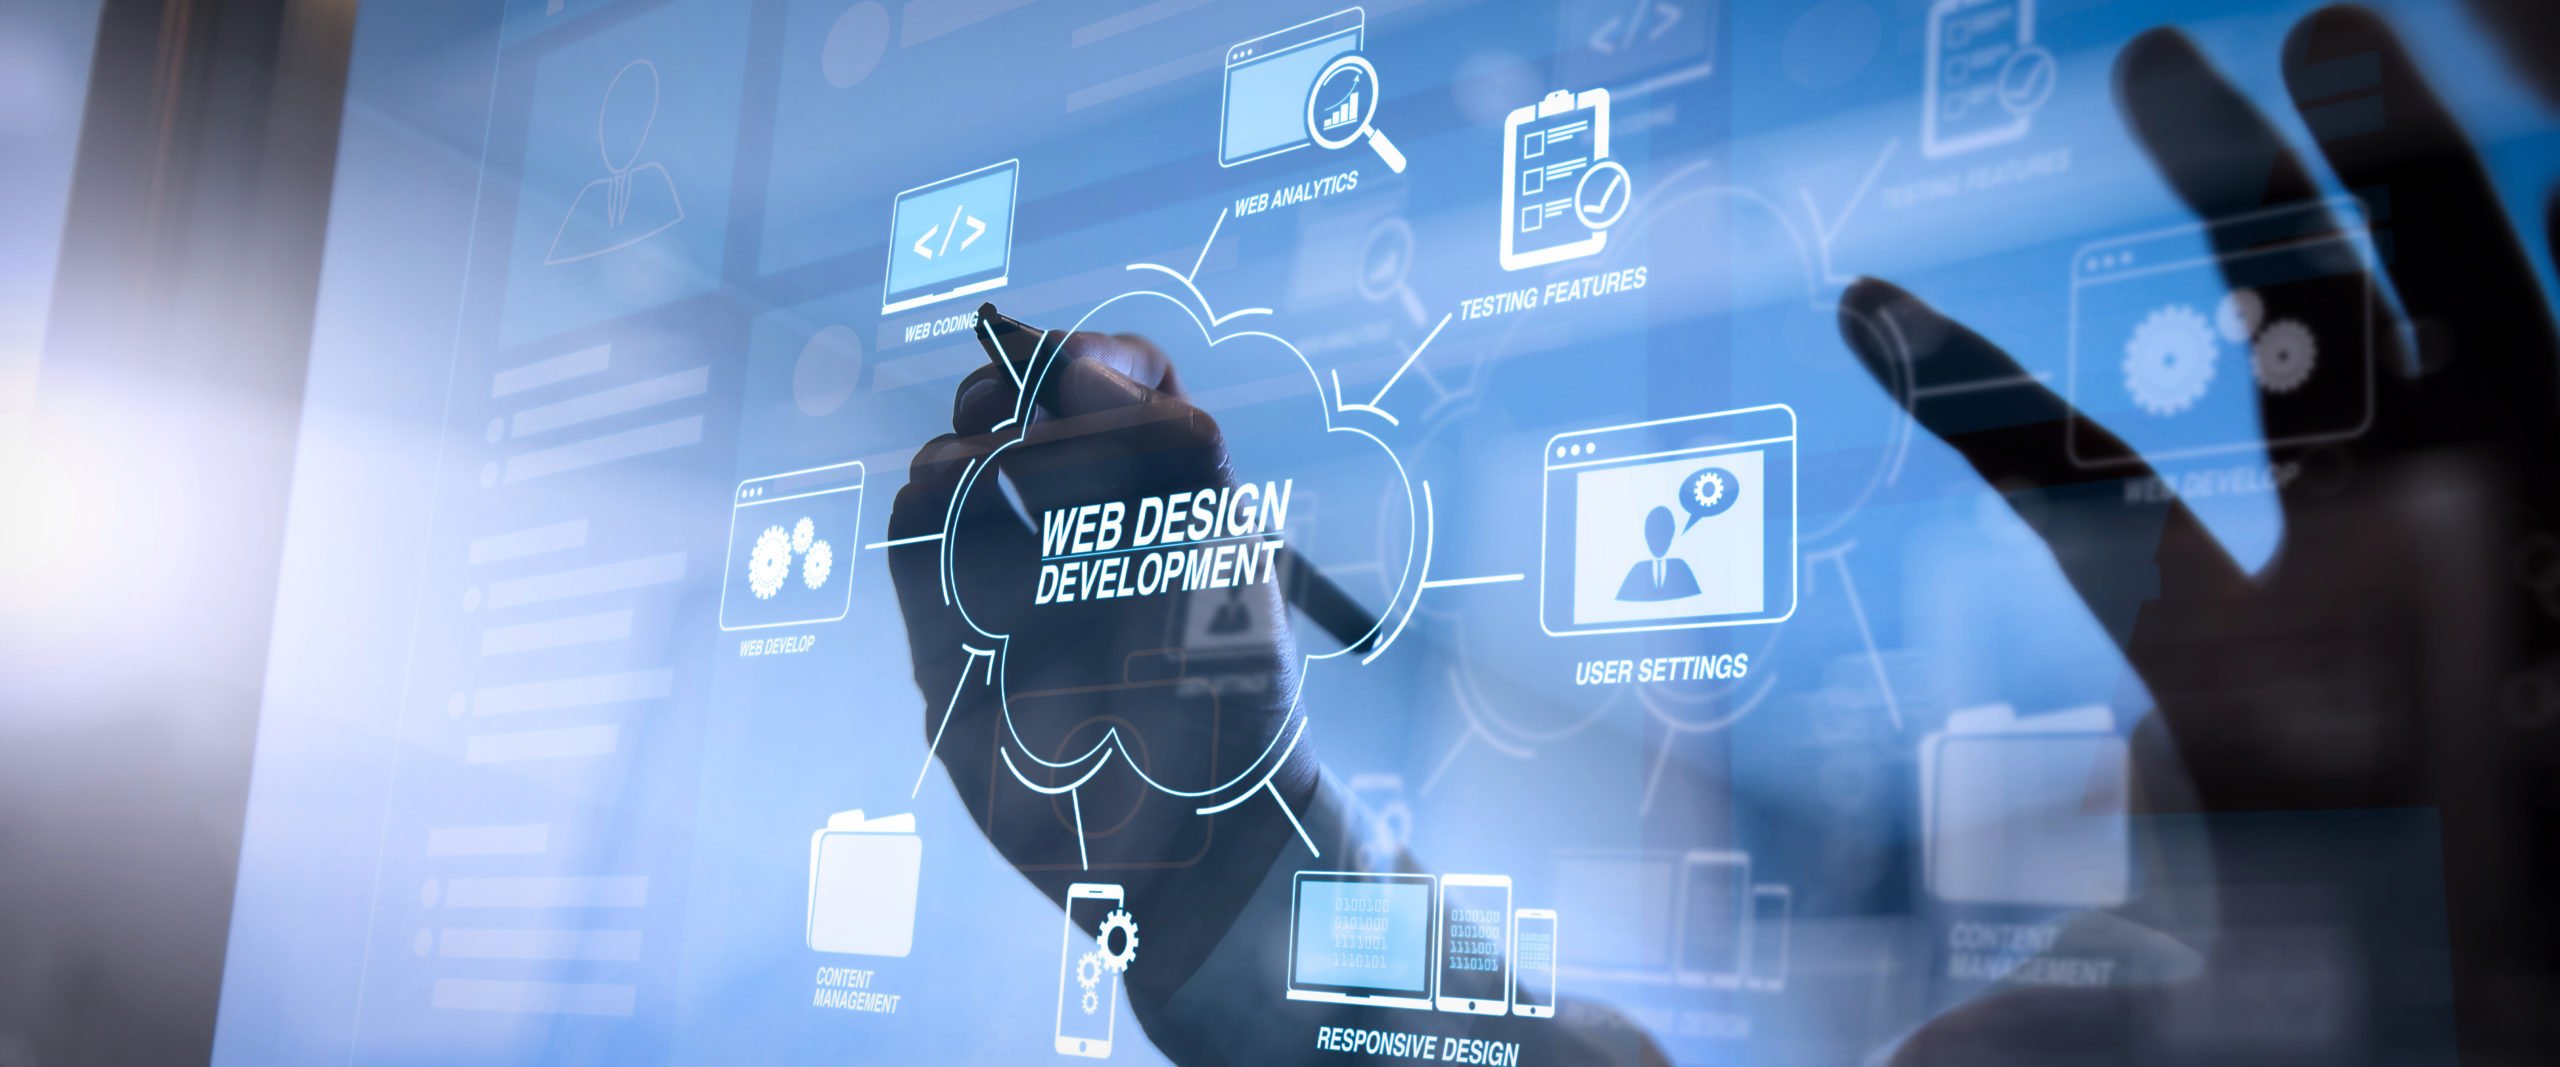 What Is A Web Design Process?